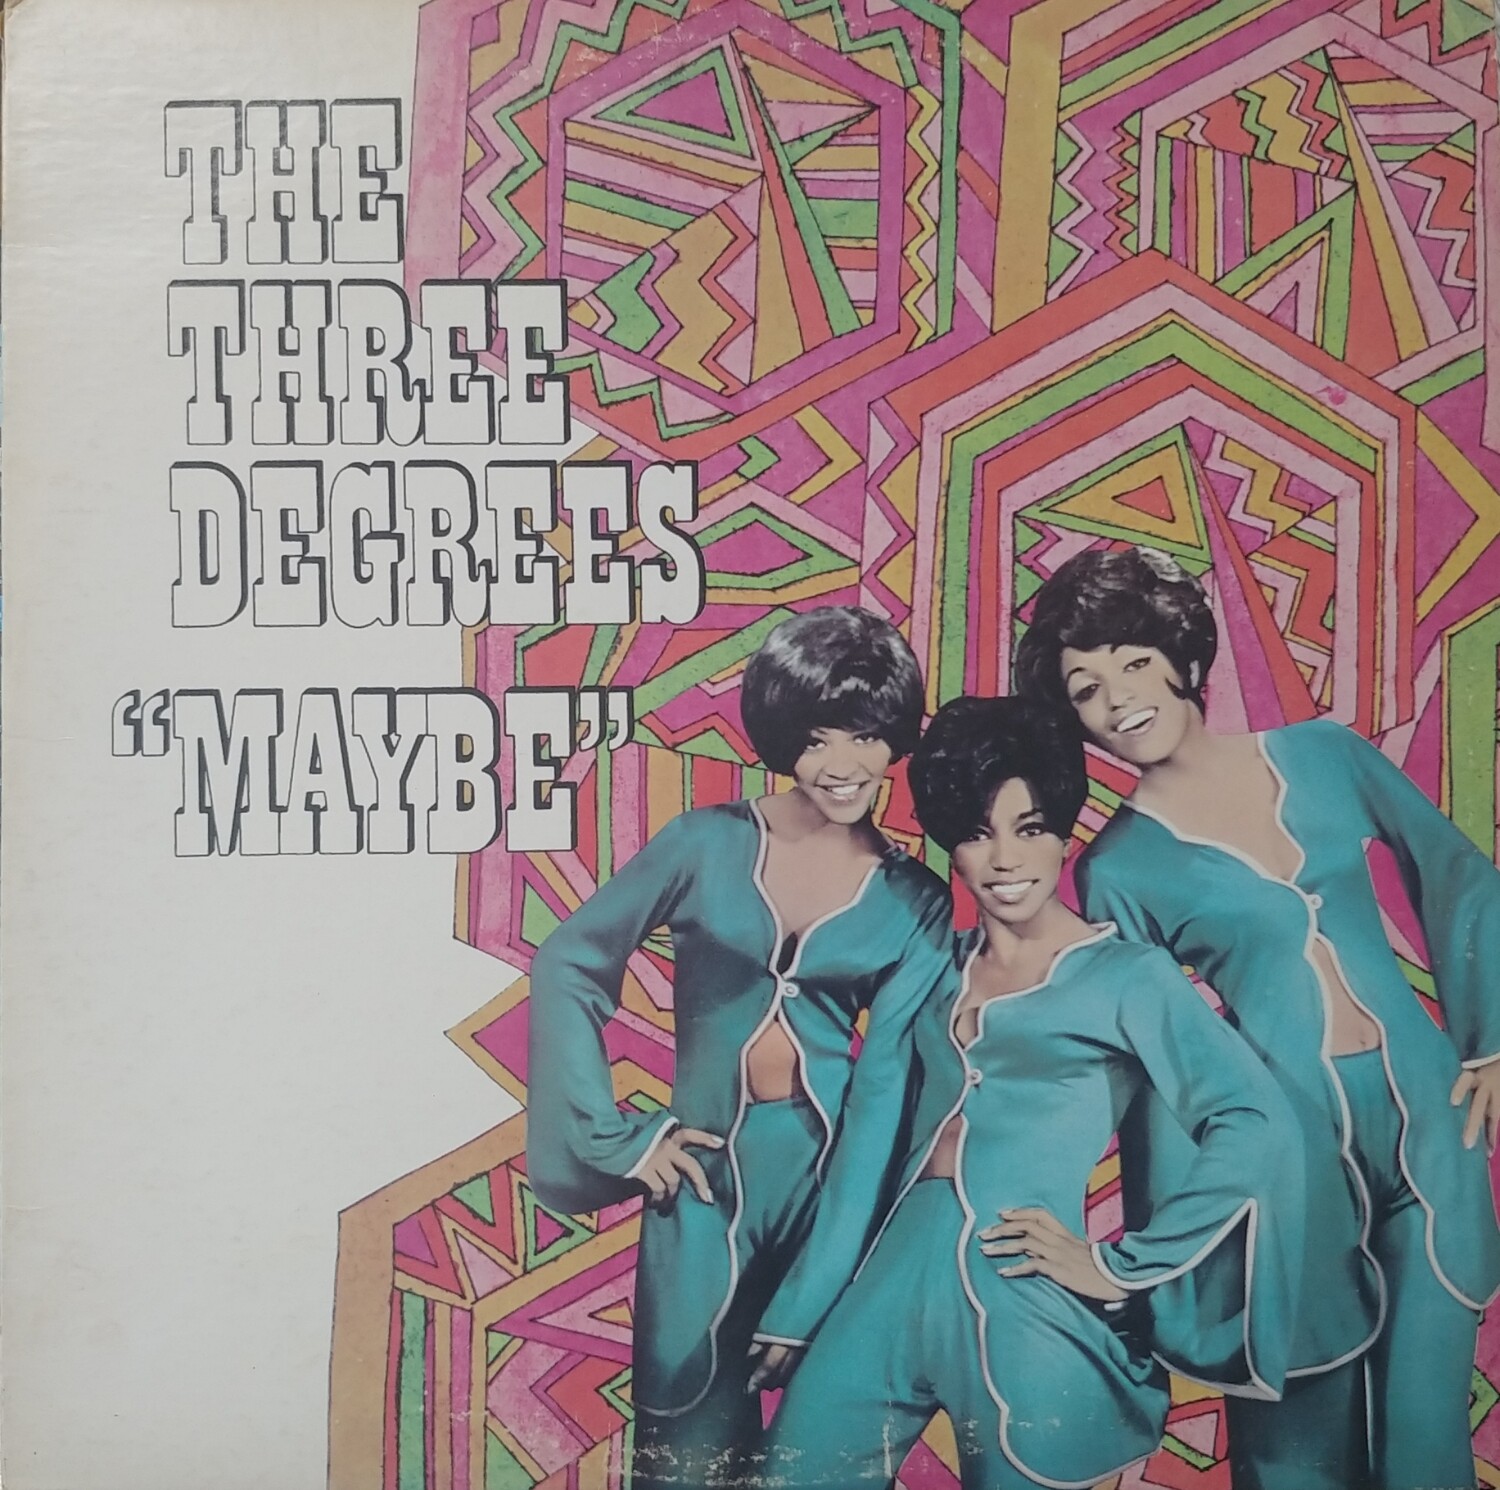 The Three Degrees - Maybe